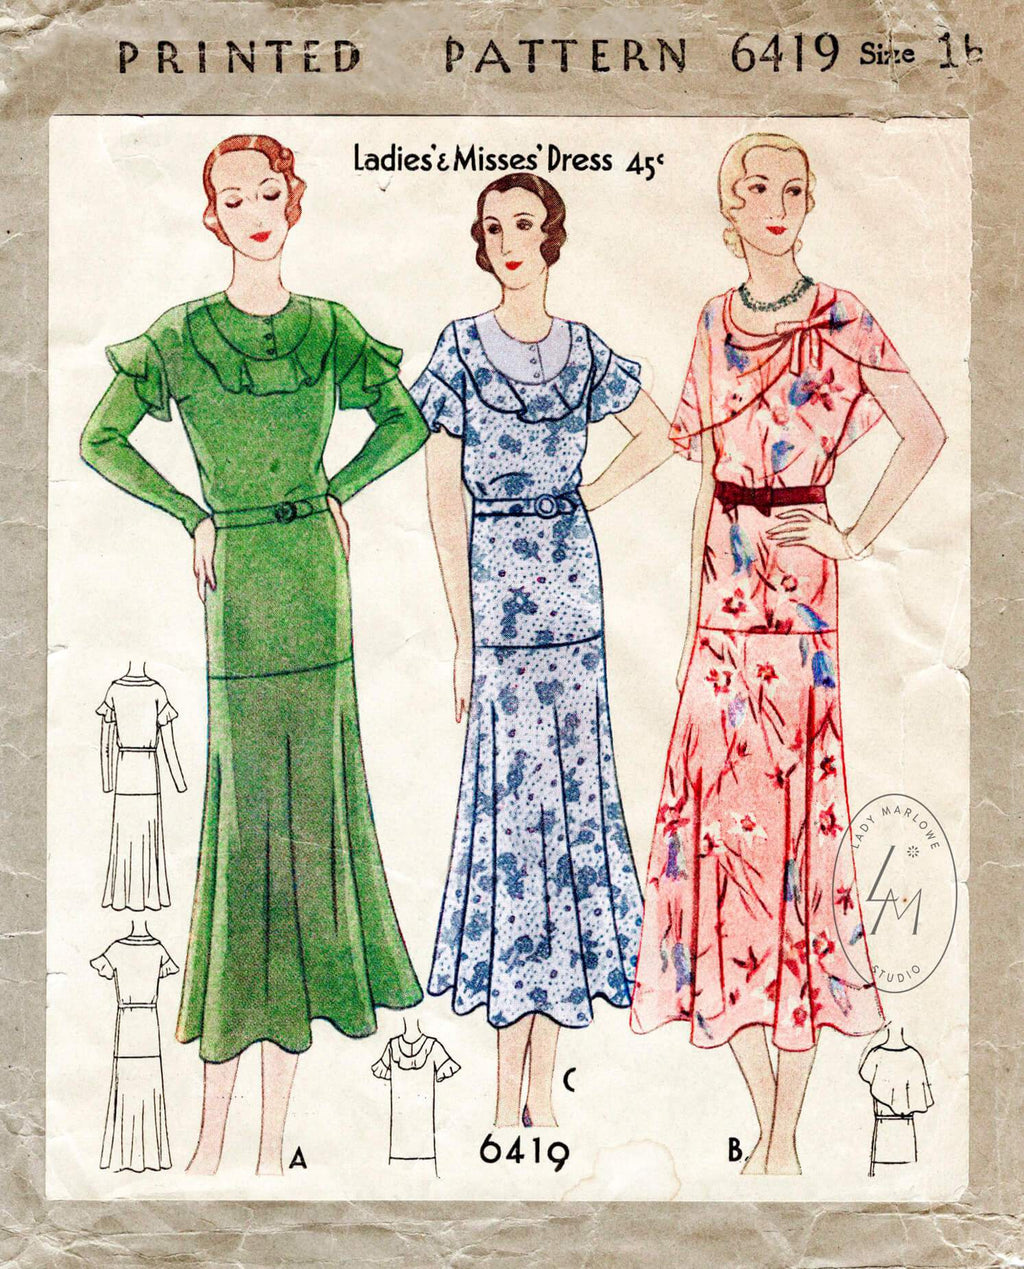 McCall 6419 1930 vintage sewing pattern 1930 30s dress